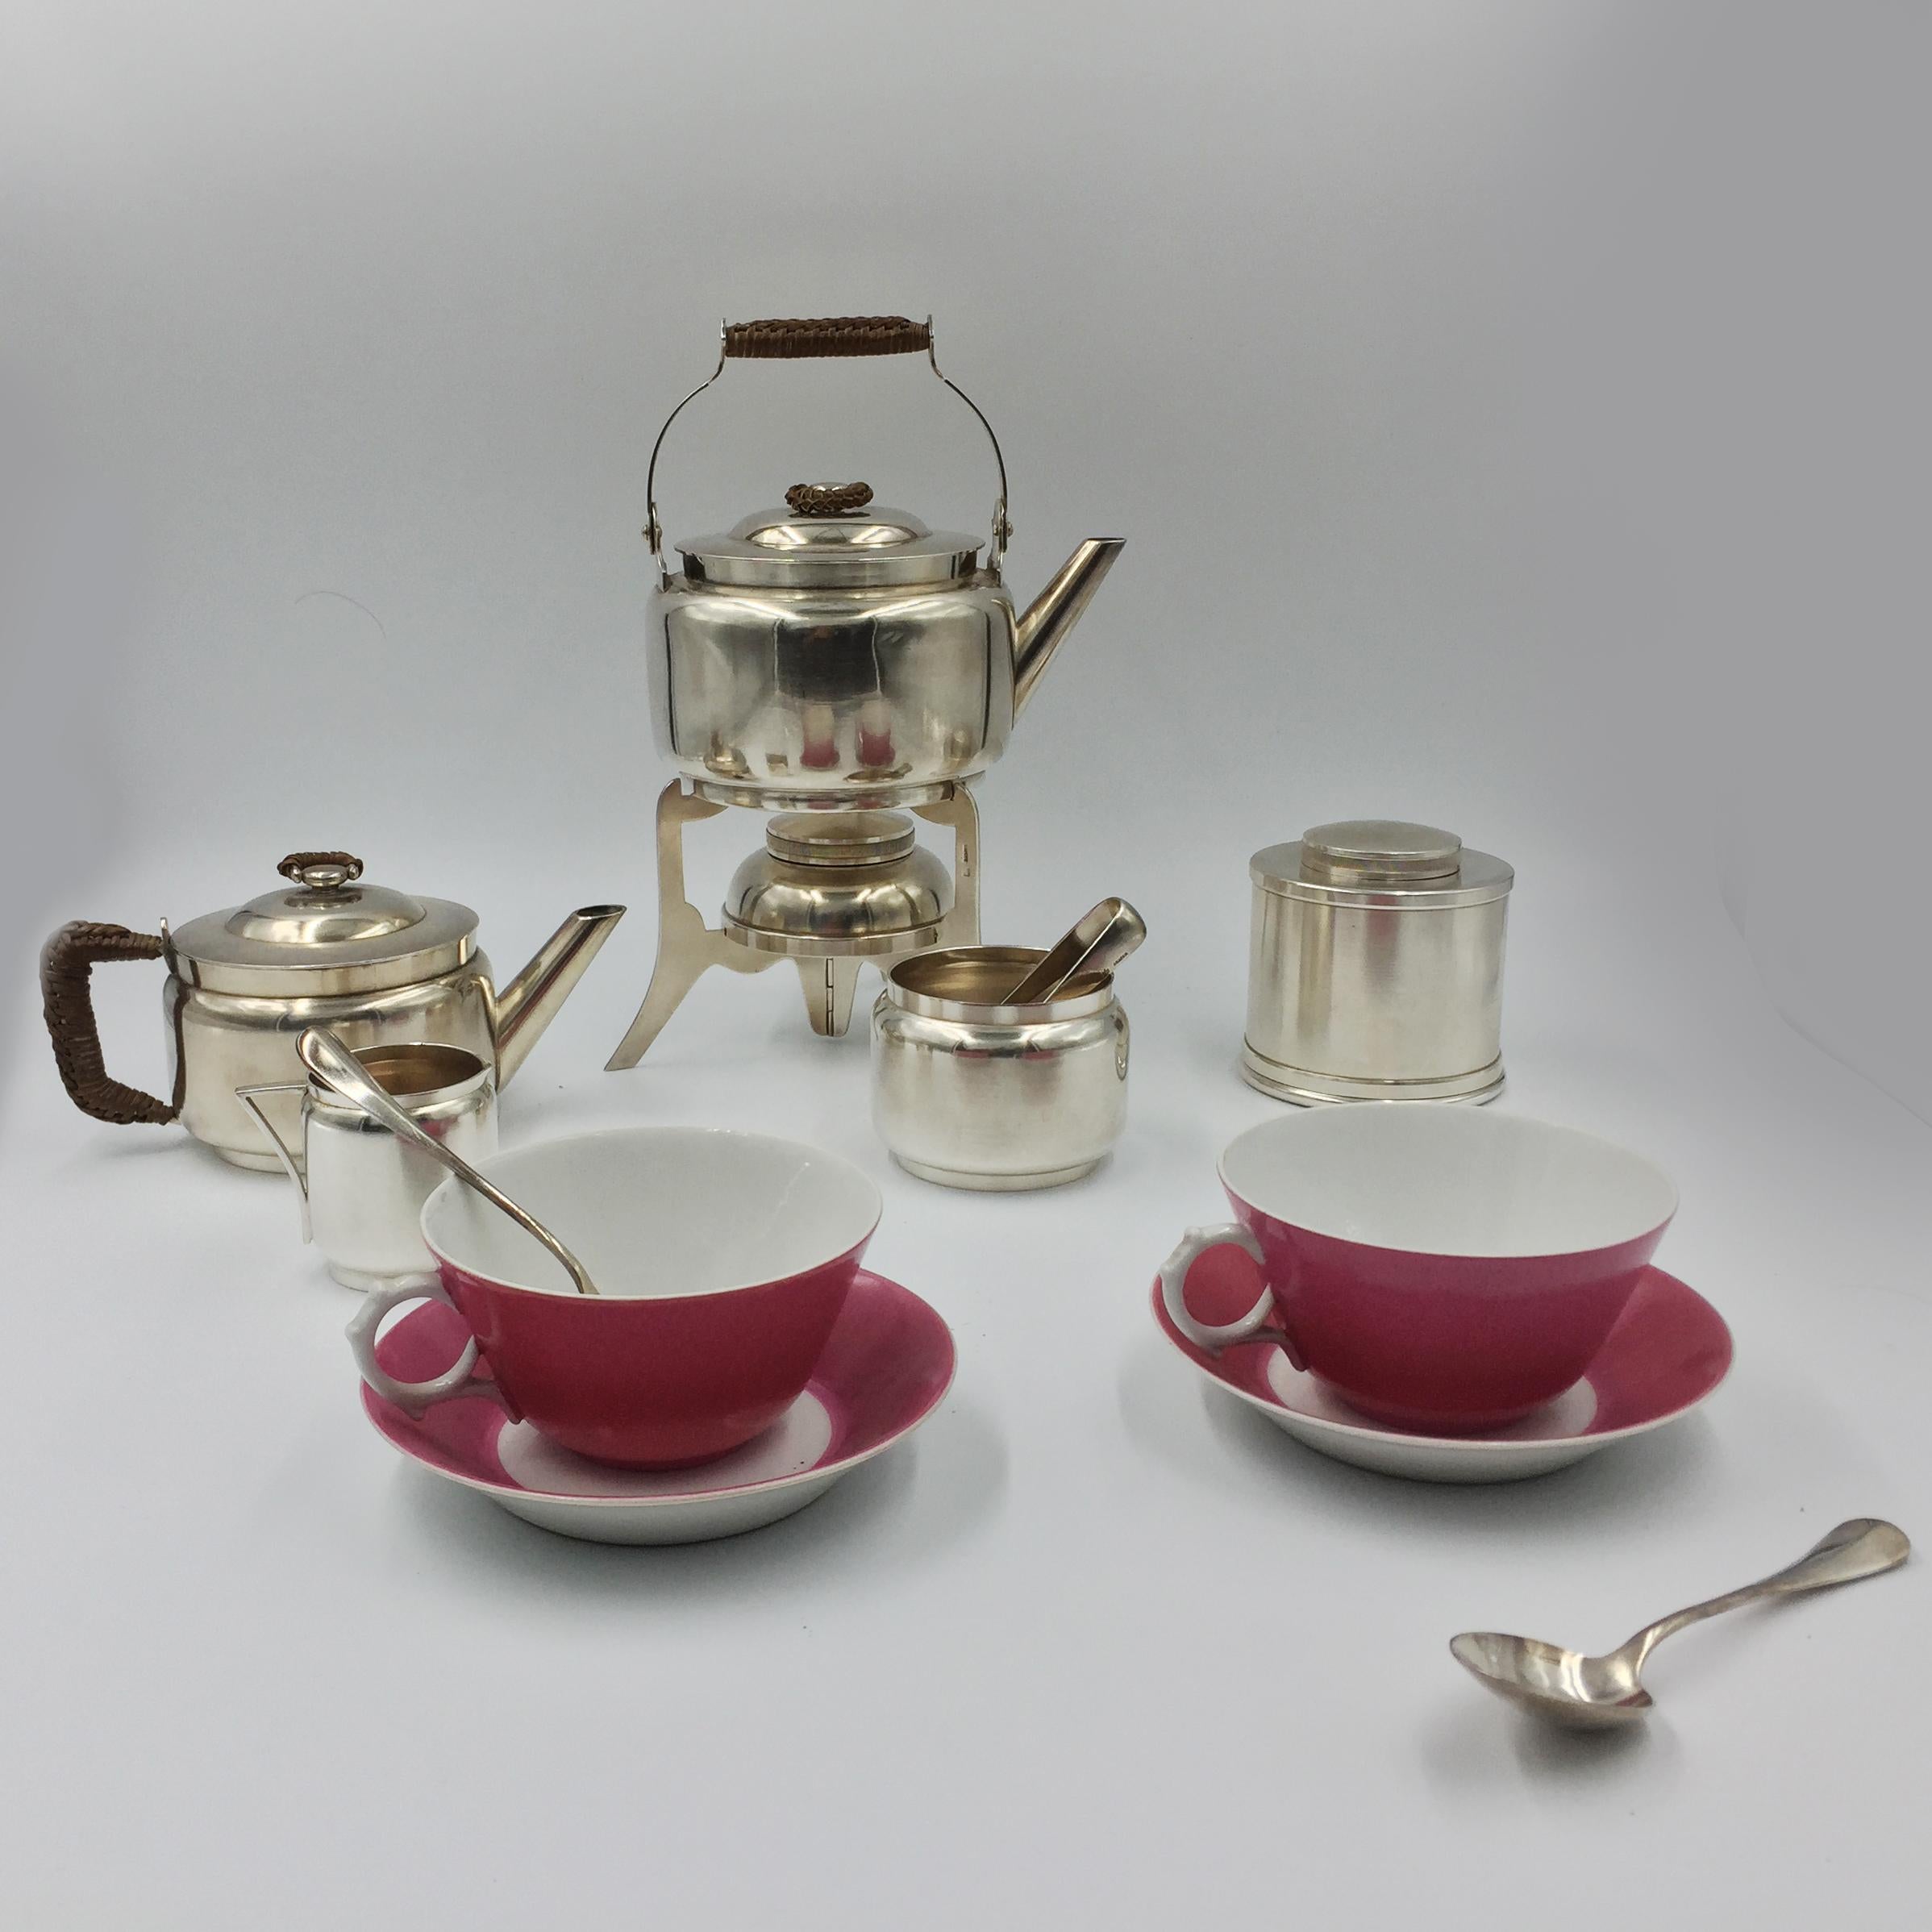 Christopher Dresser tea metal is in dark blue-grained leather. The design is the number # 85275. In very good condition with its original pieces. Silverware is from England and pink teacups and saucers from Limoges in France.
This tea travel